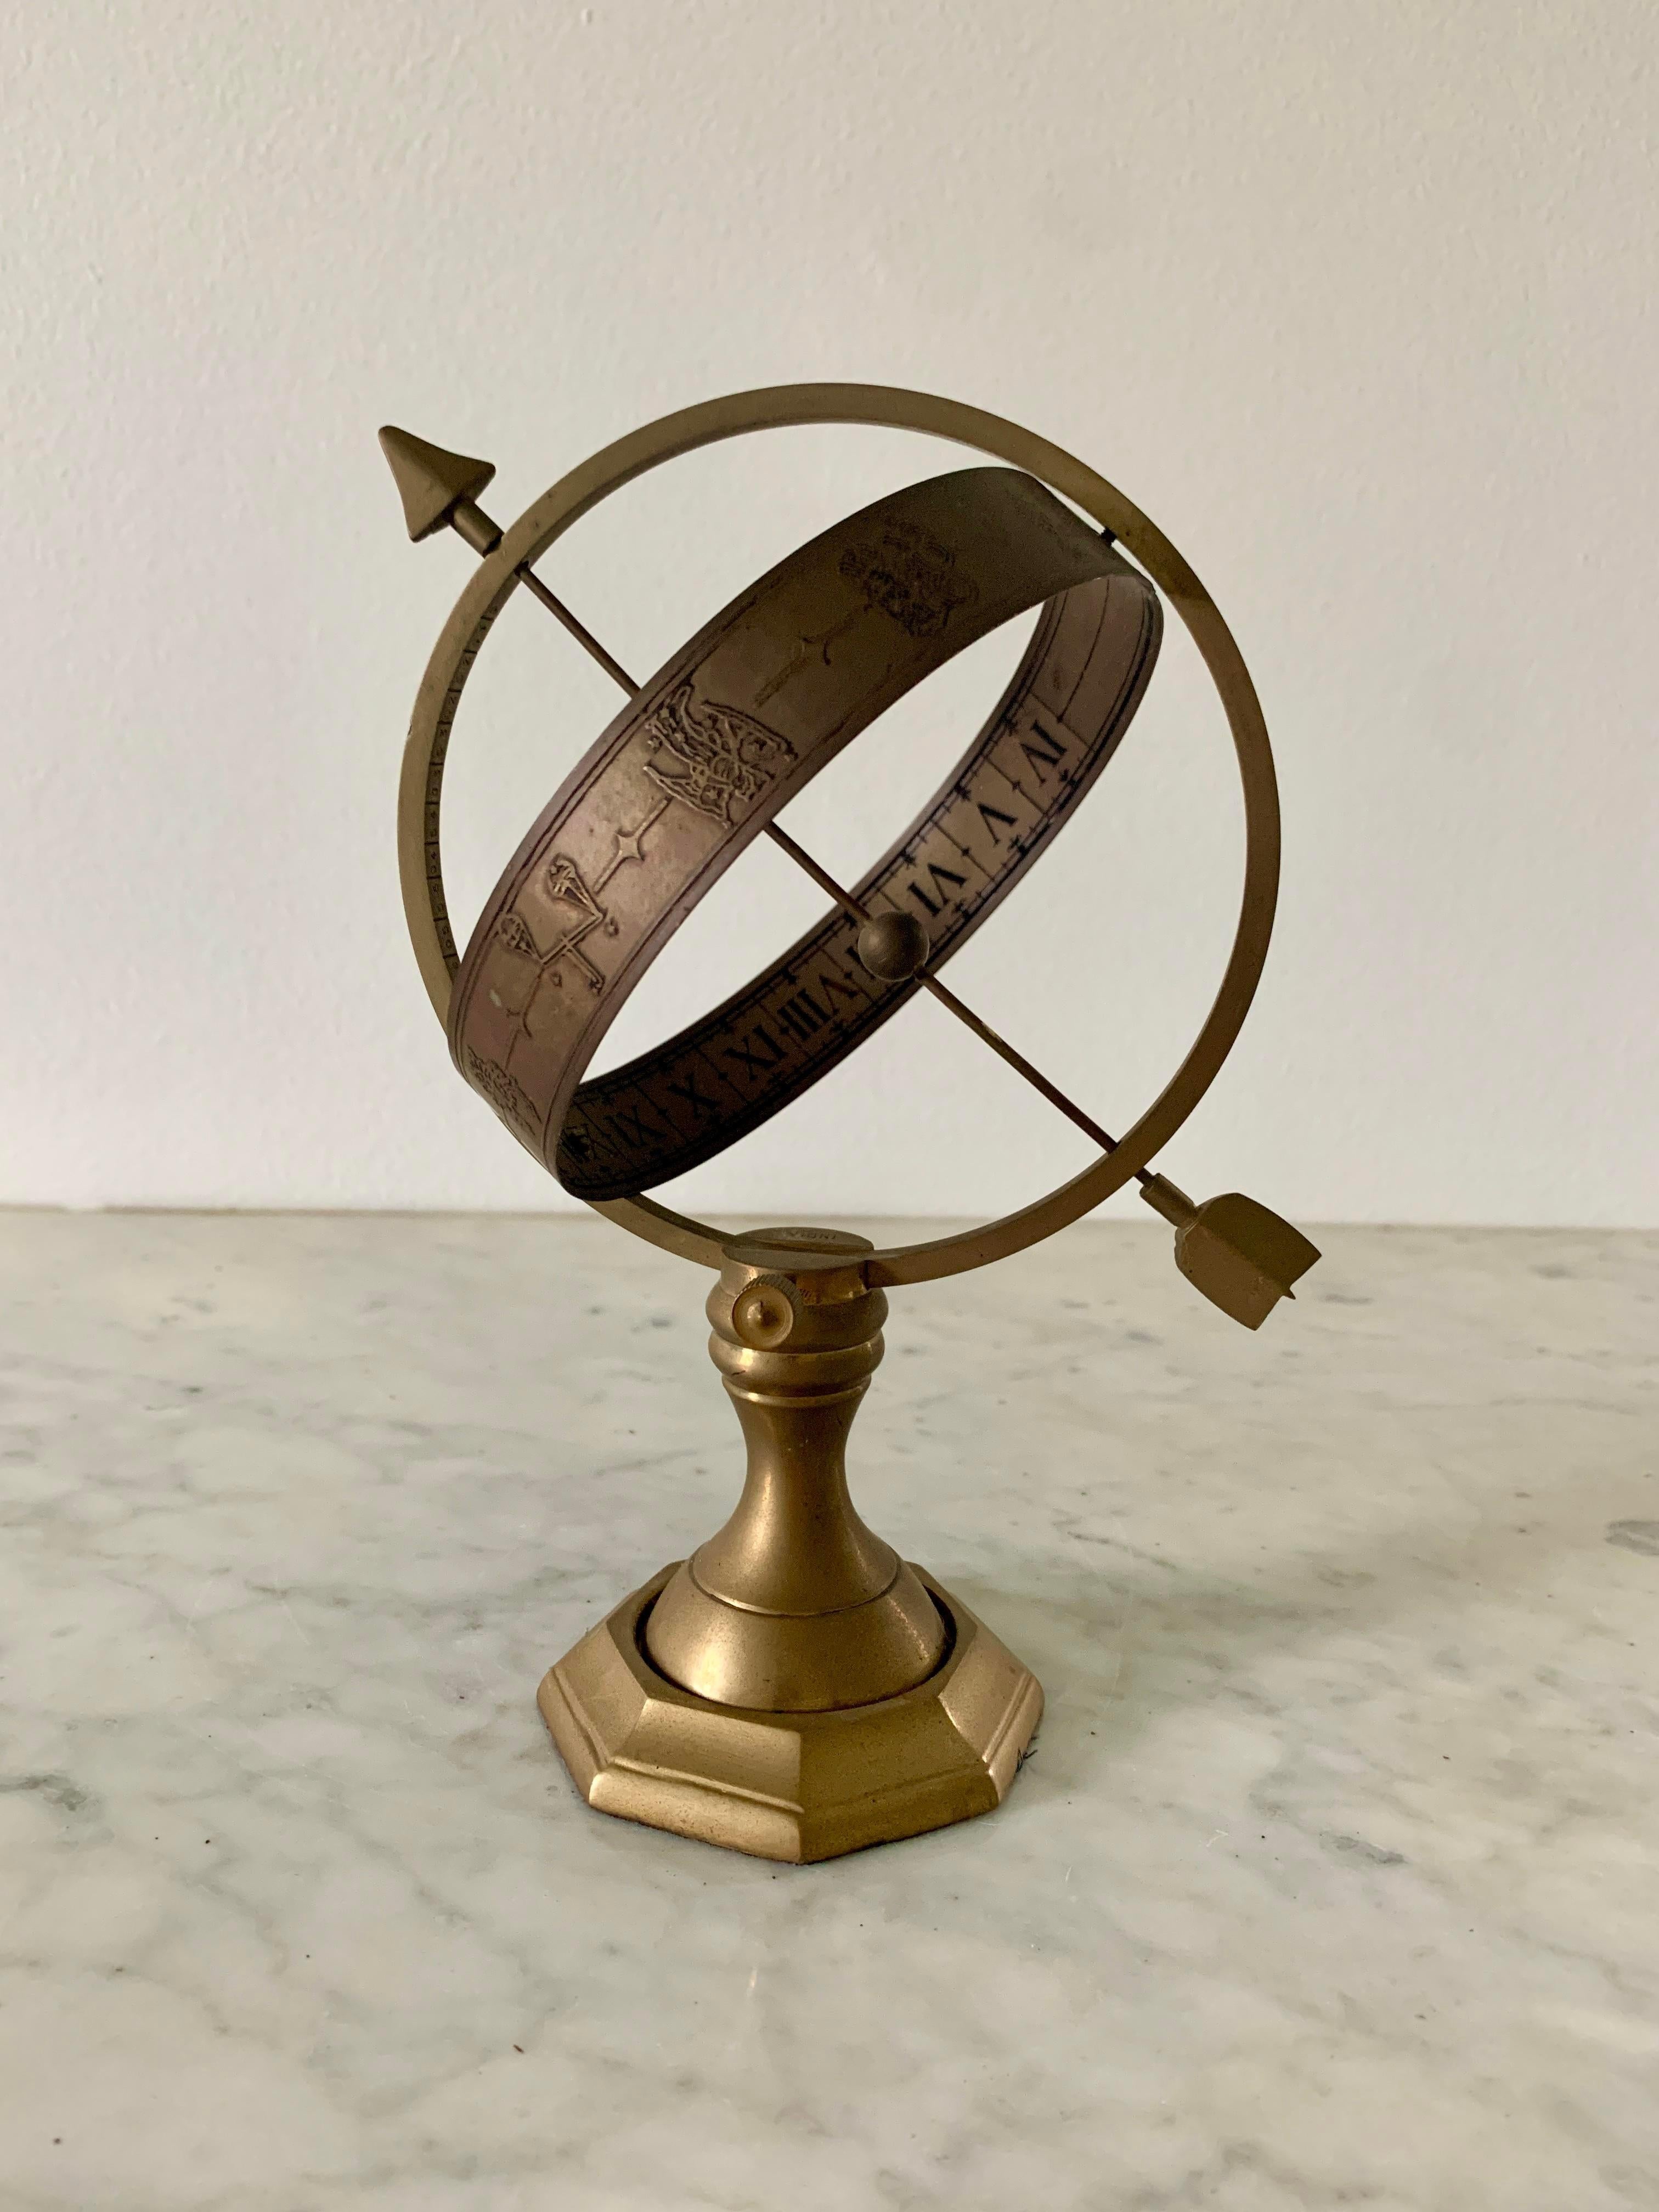 A stunning vintage brass armillary sundial featuring Roman numerals and the zodiac signs.

Late 20th century.

Measures: 6